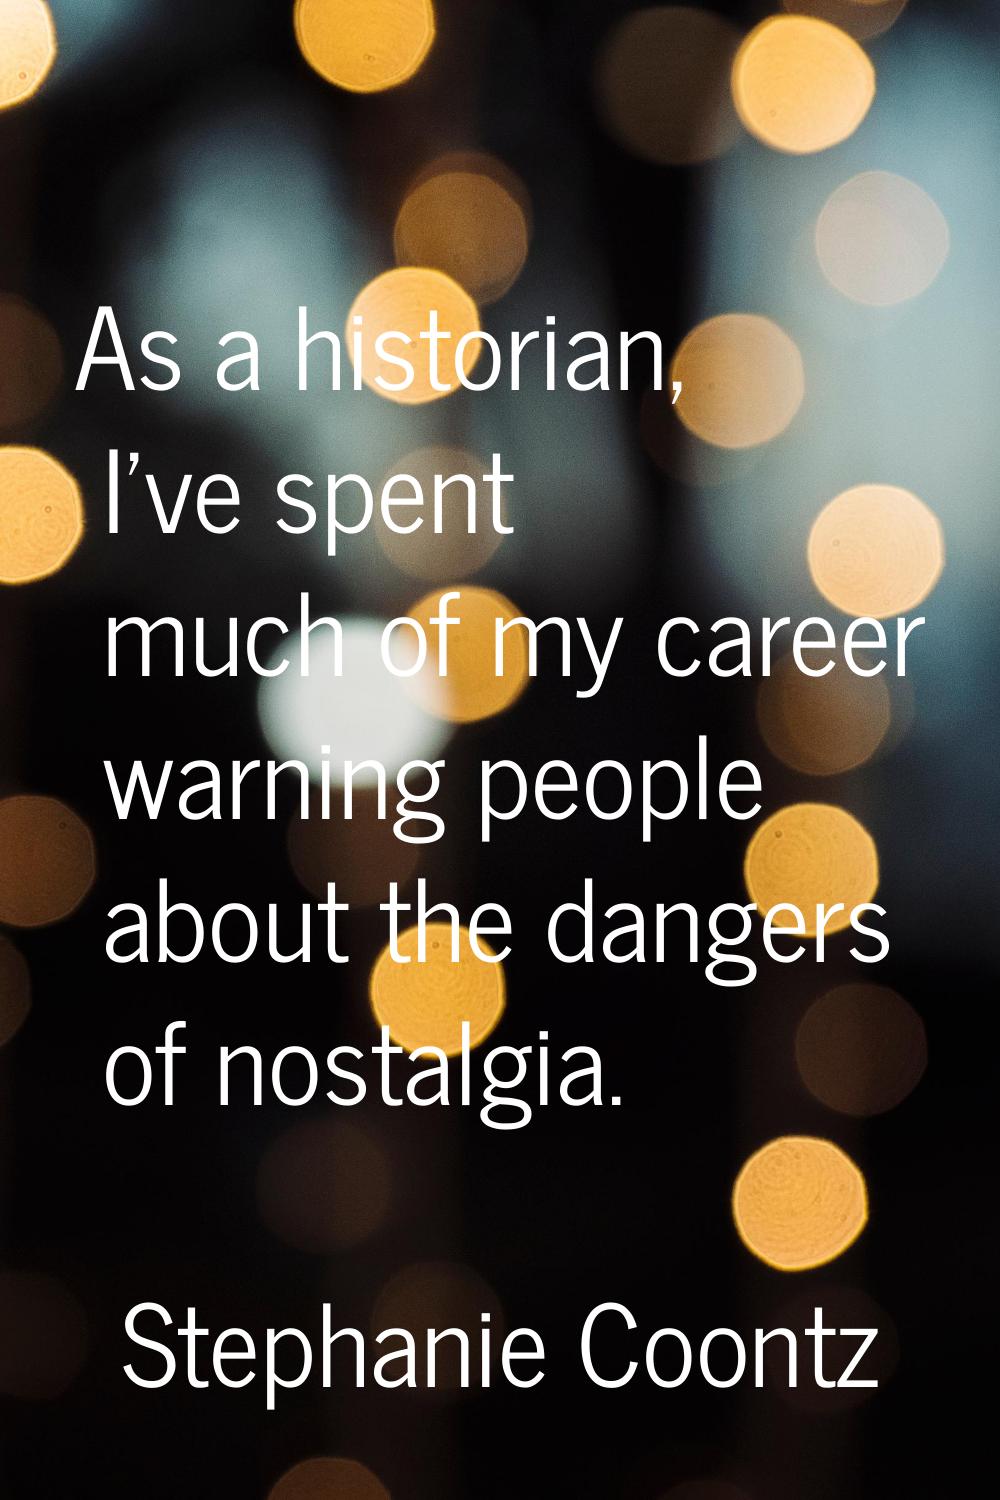 As a historian, I've spent much of my career warning people about the dangers of nostalgia.